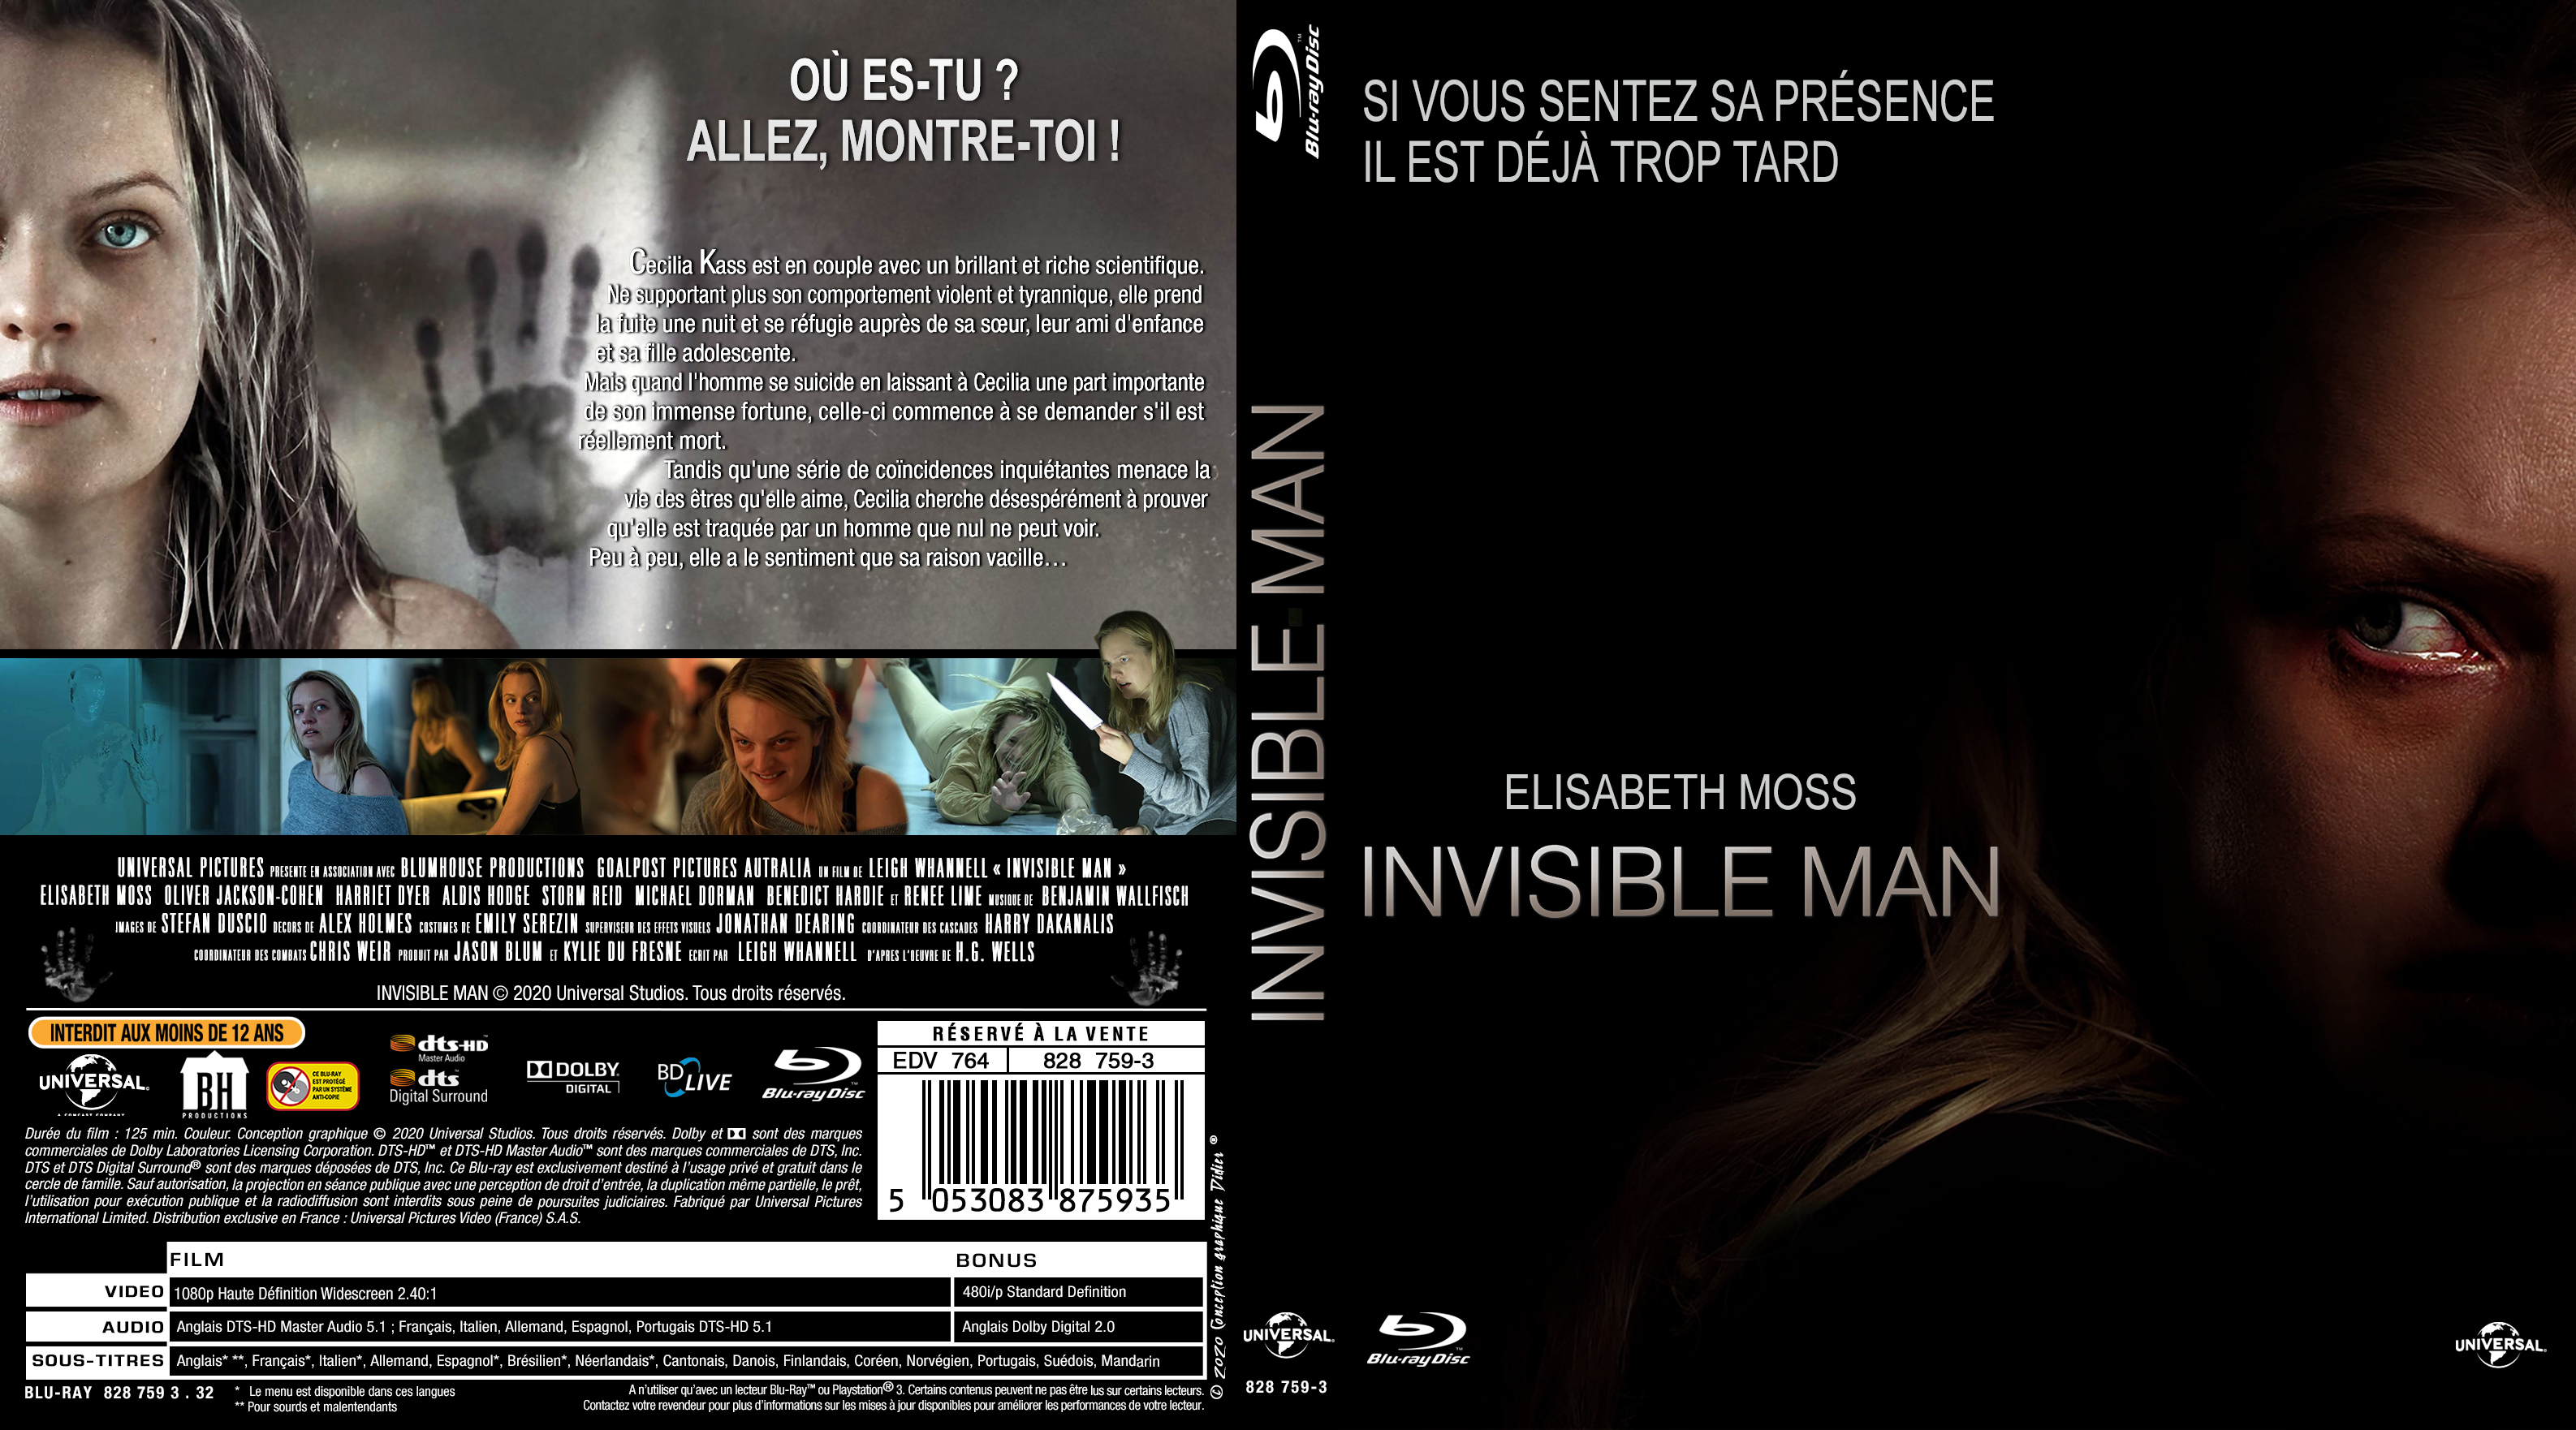 Jaquette DVD Invisible man custom (BLU-RAY)